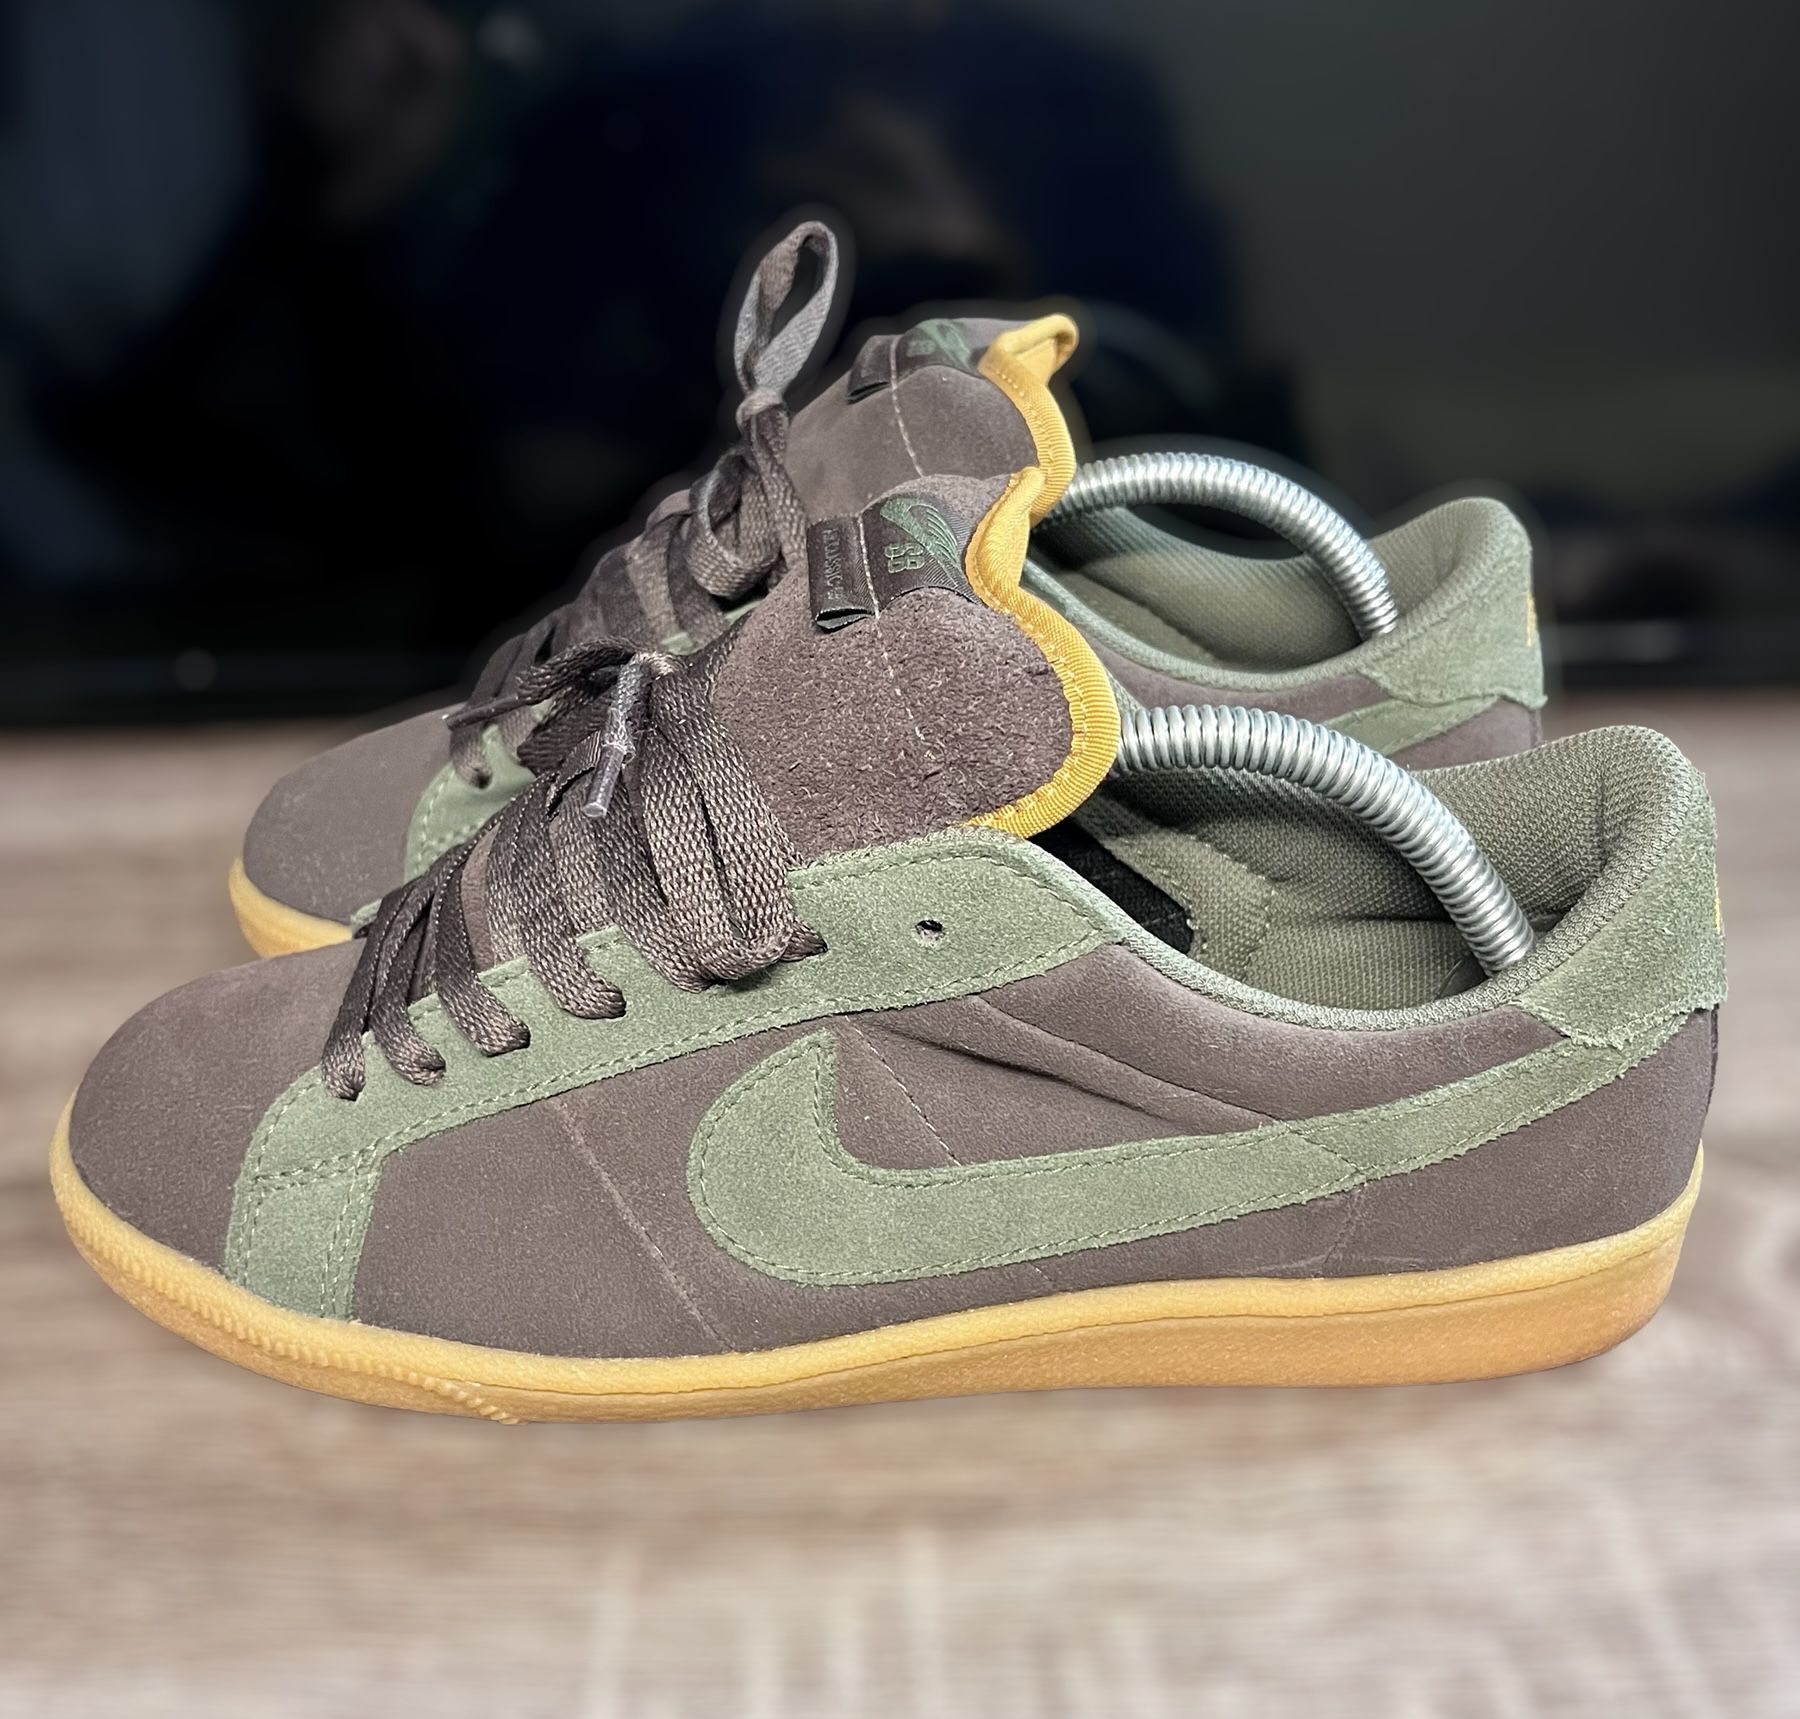 Vintage Nike Classic SB Size 8.5 Suede Baroque Army Olive for Sale in Huntington Park, CA -